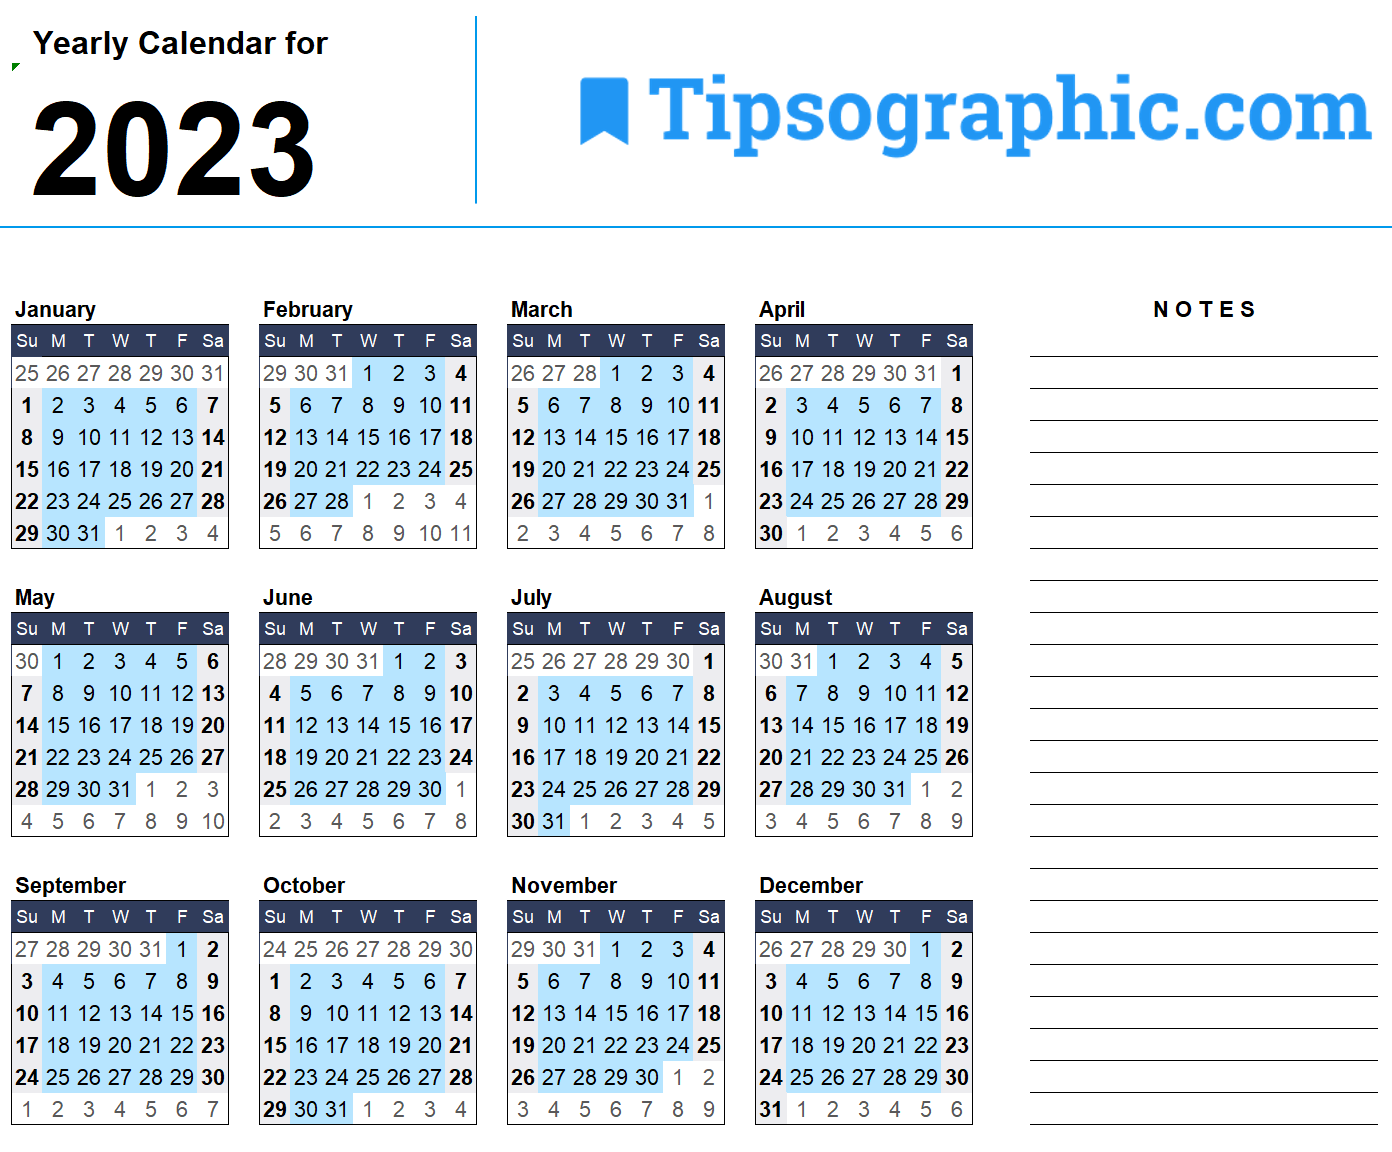 FREE DOWNLOAD > Download the 2023 Yearly Calendar